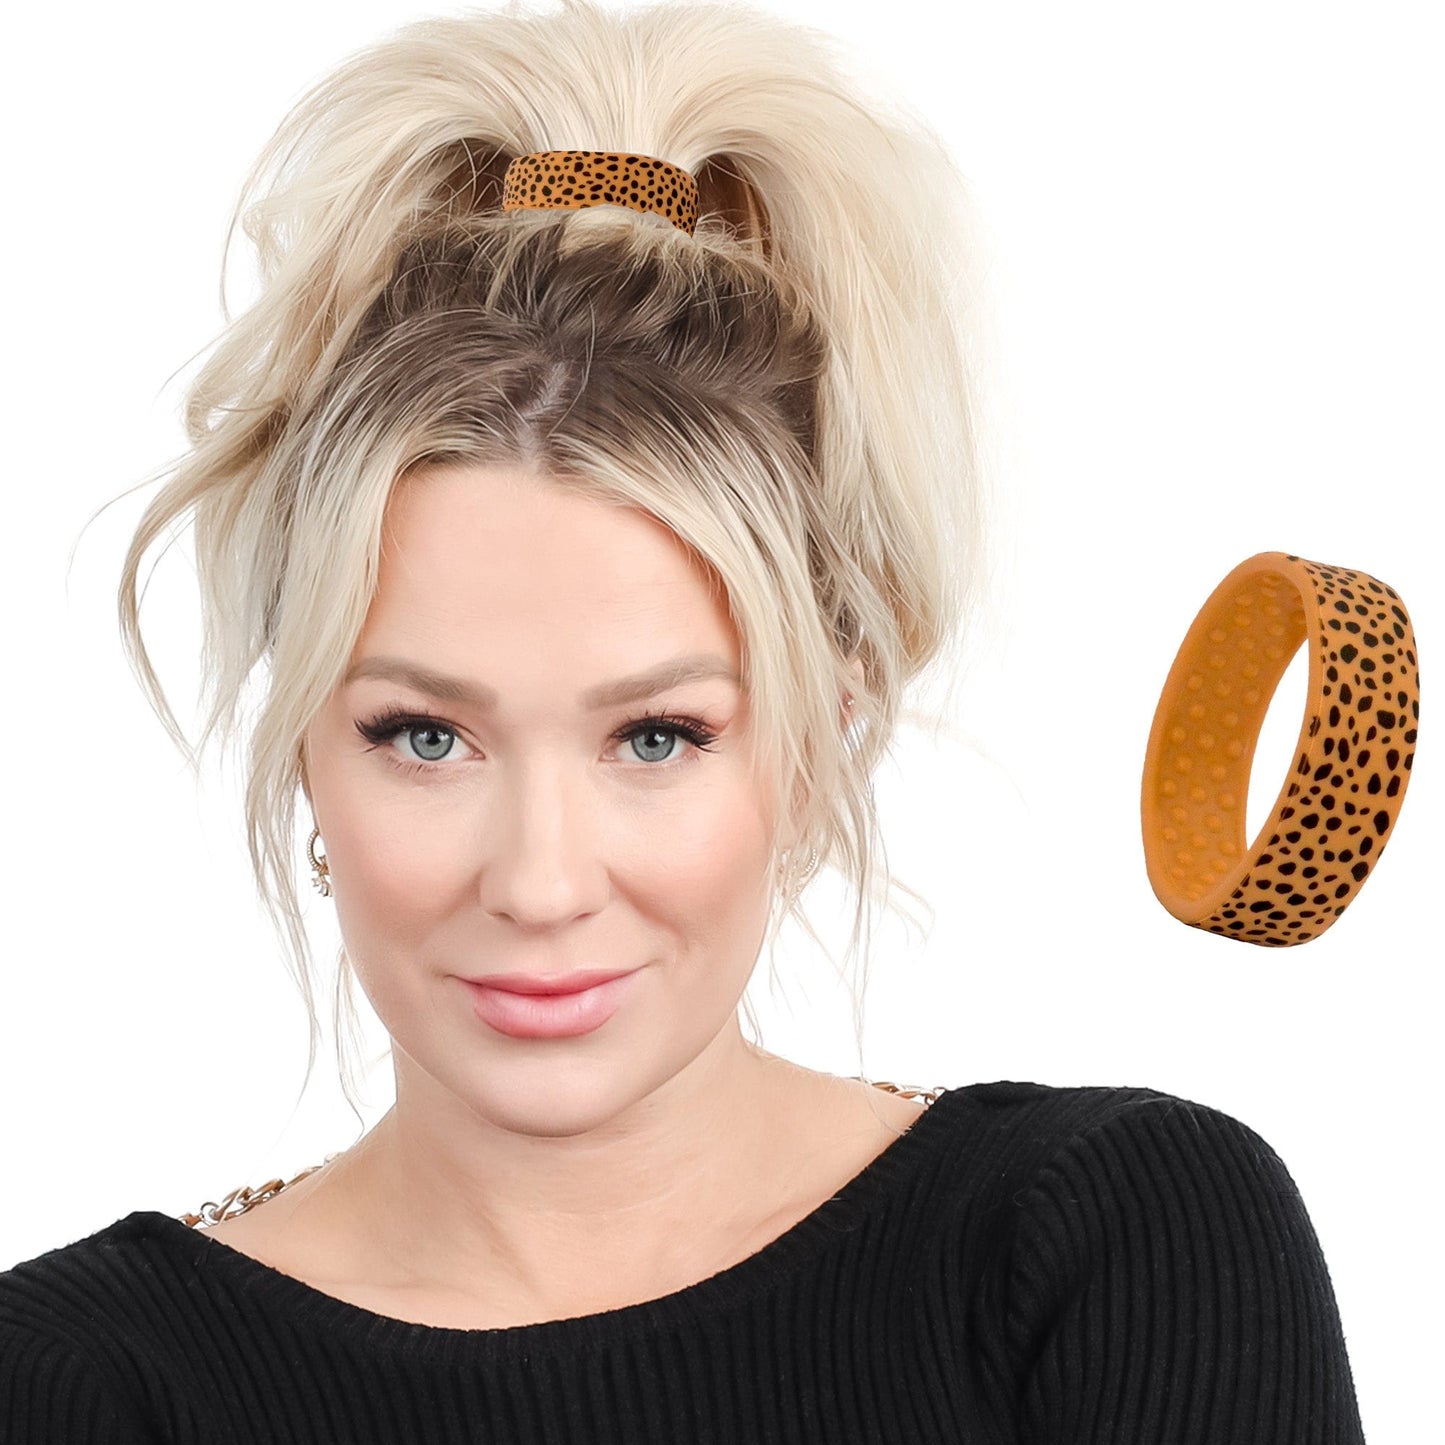 Cheetah Limited Edition Designer PONY-O. This larger size is perfect for ponytails and all-up styles..